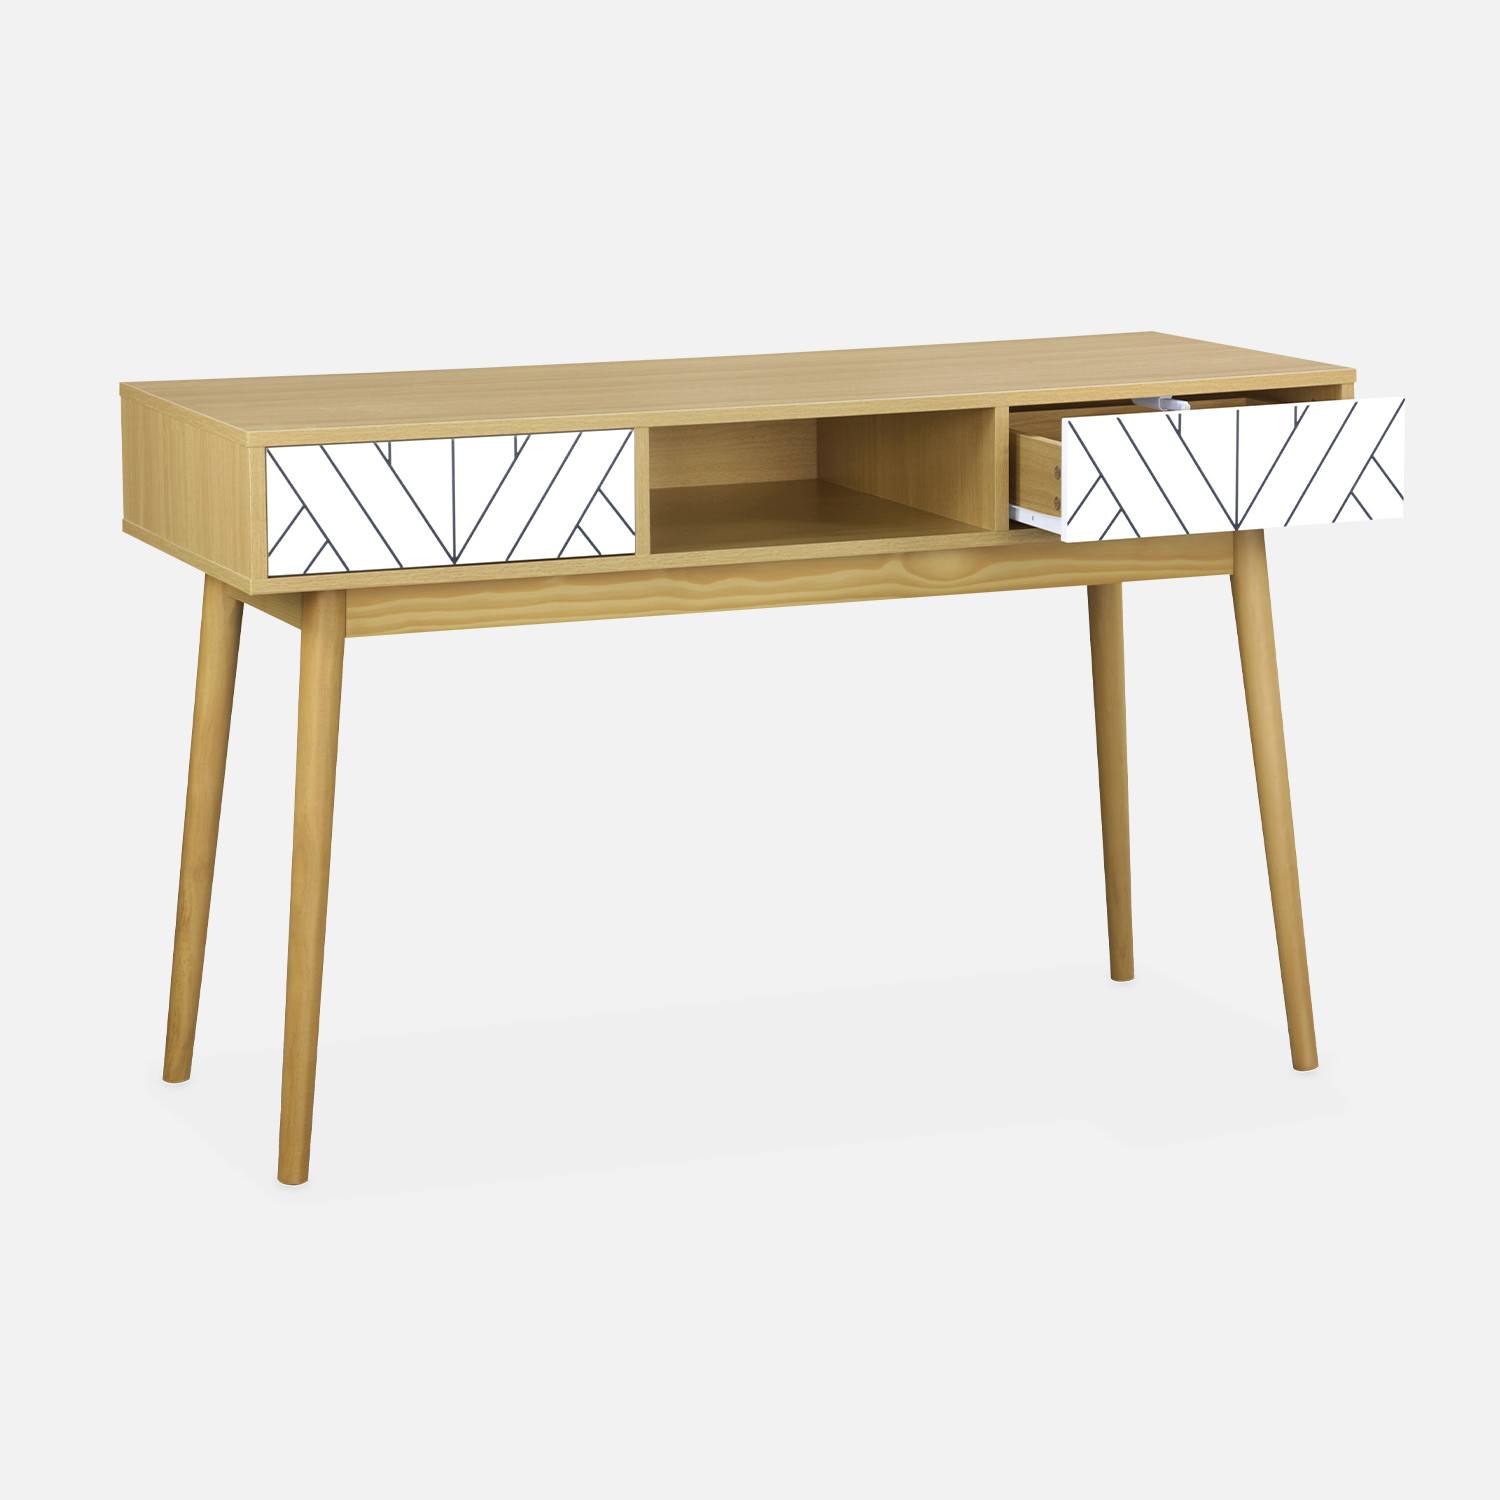 Wood-effect console table with two drawers and one storage nook, 120x48x75cm - Mika - White Photo6